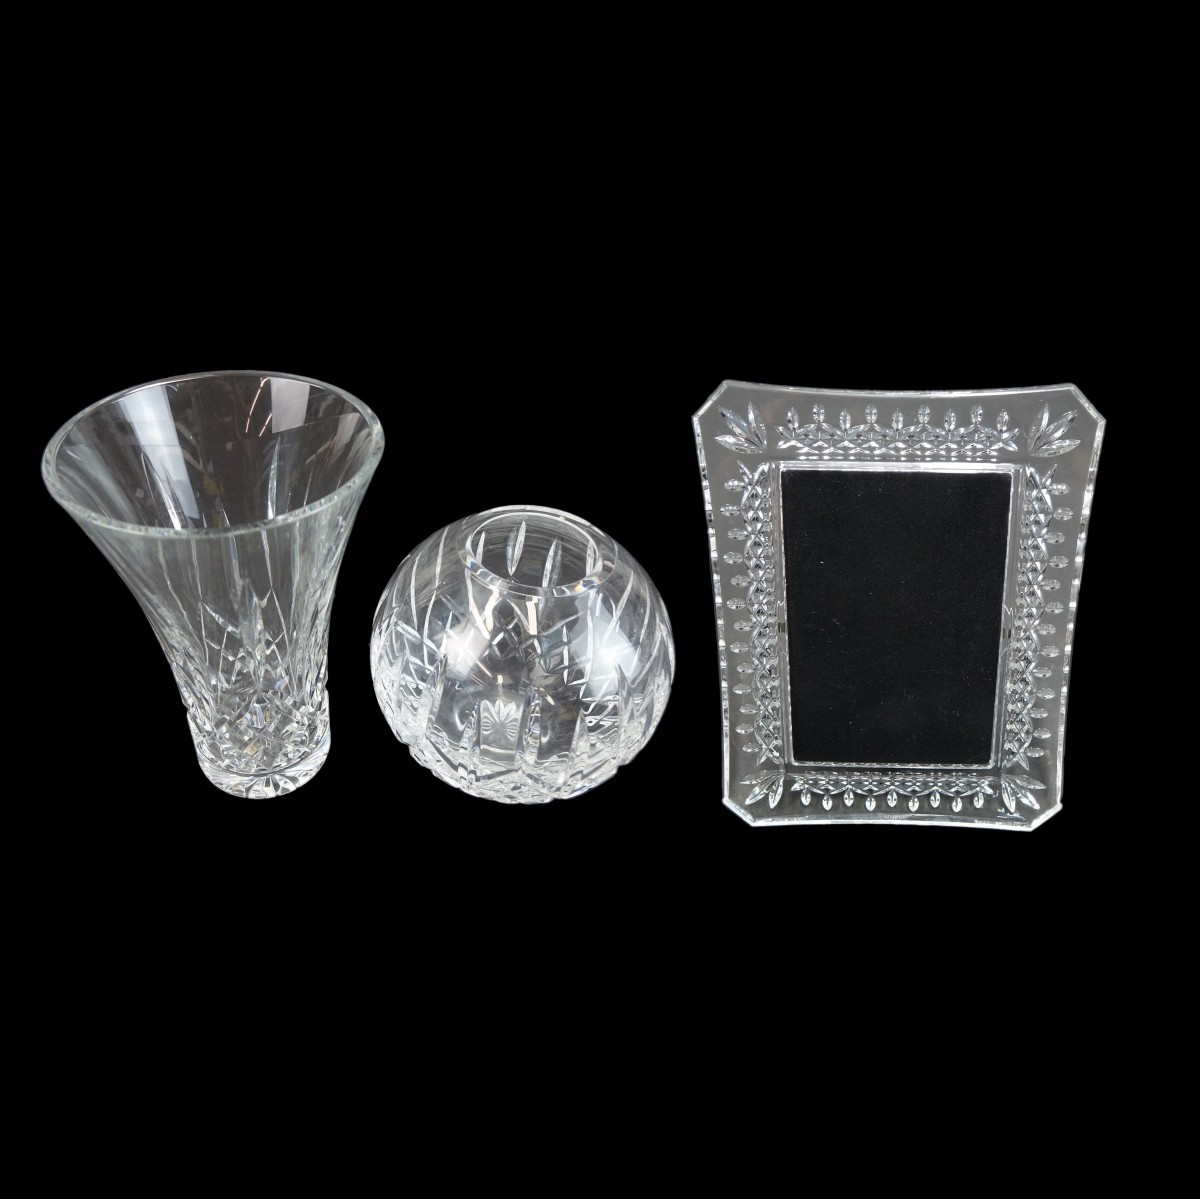 3 Waterford Lismore Crystal Table Accessories